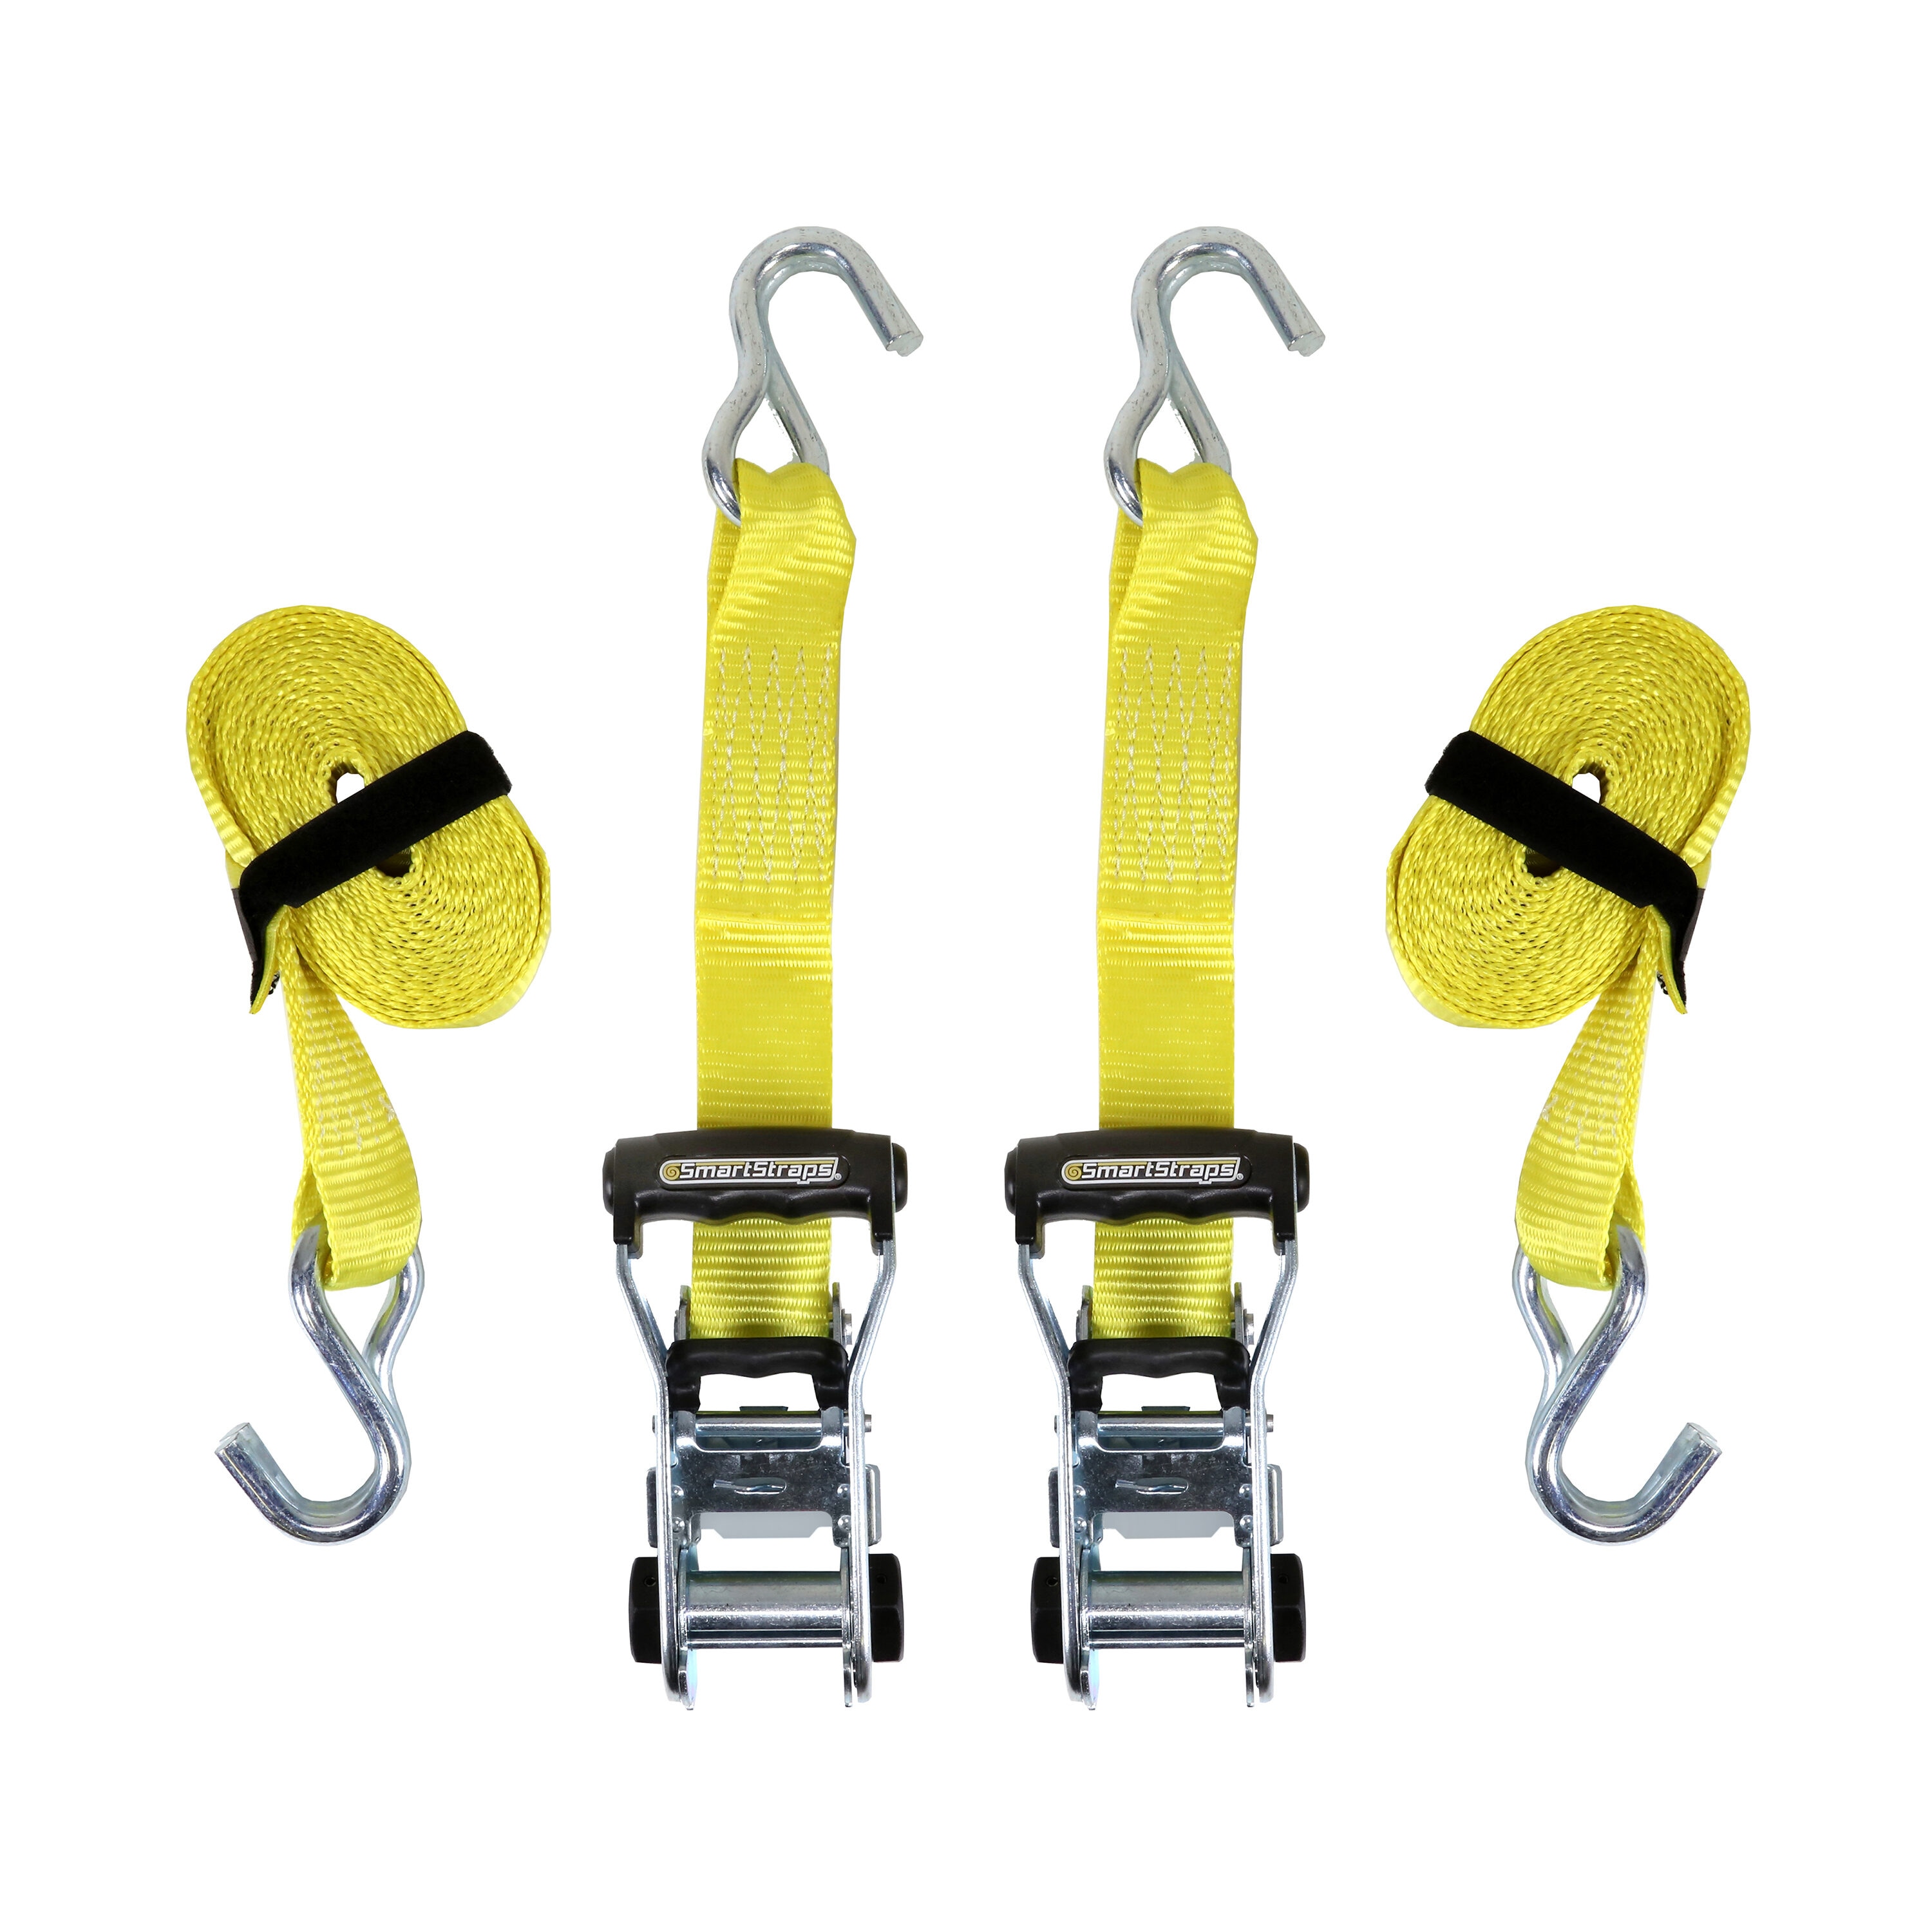 Stretcher Strap Extension 3 Foot - Yellow - Medical Warehouse